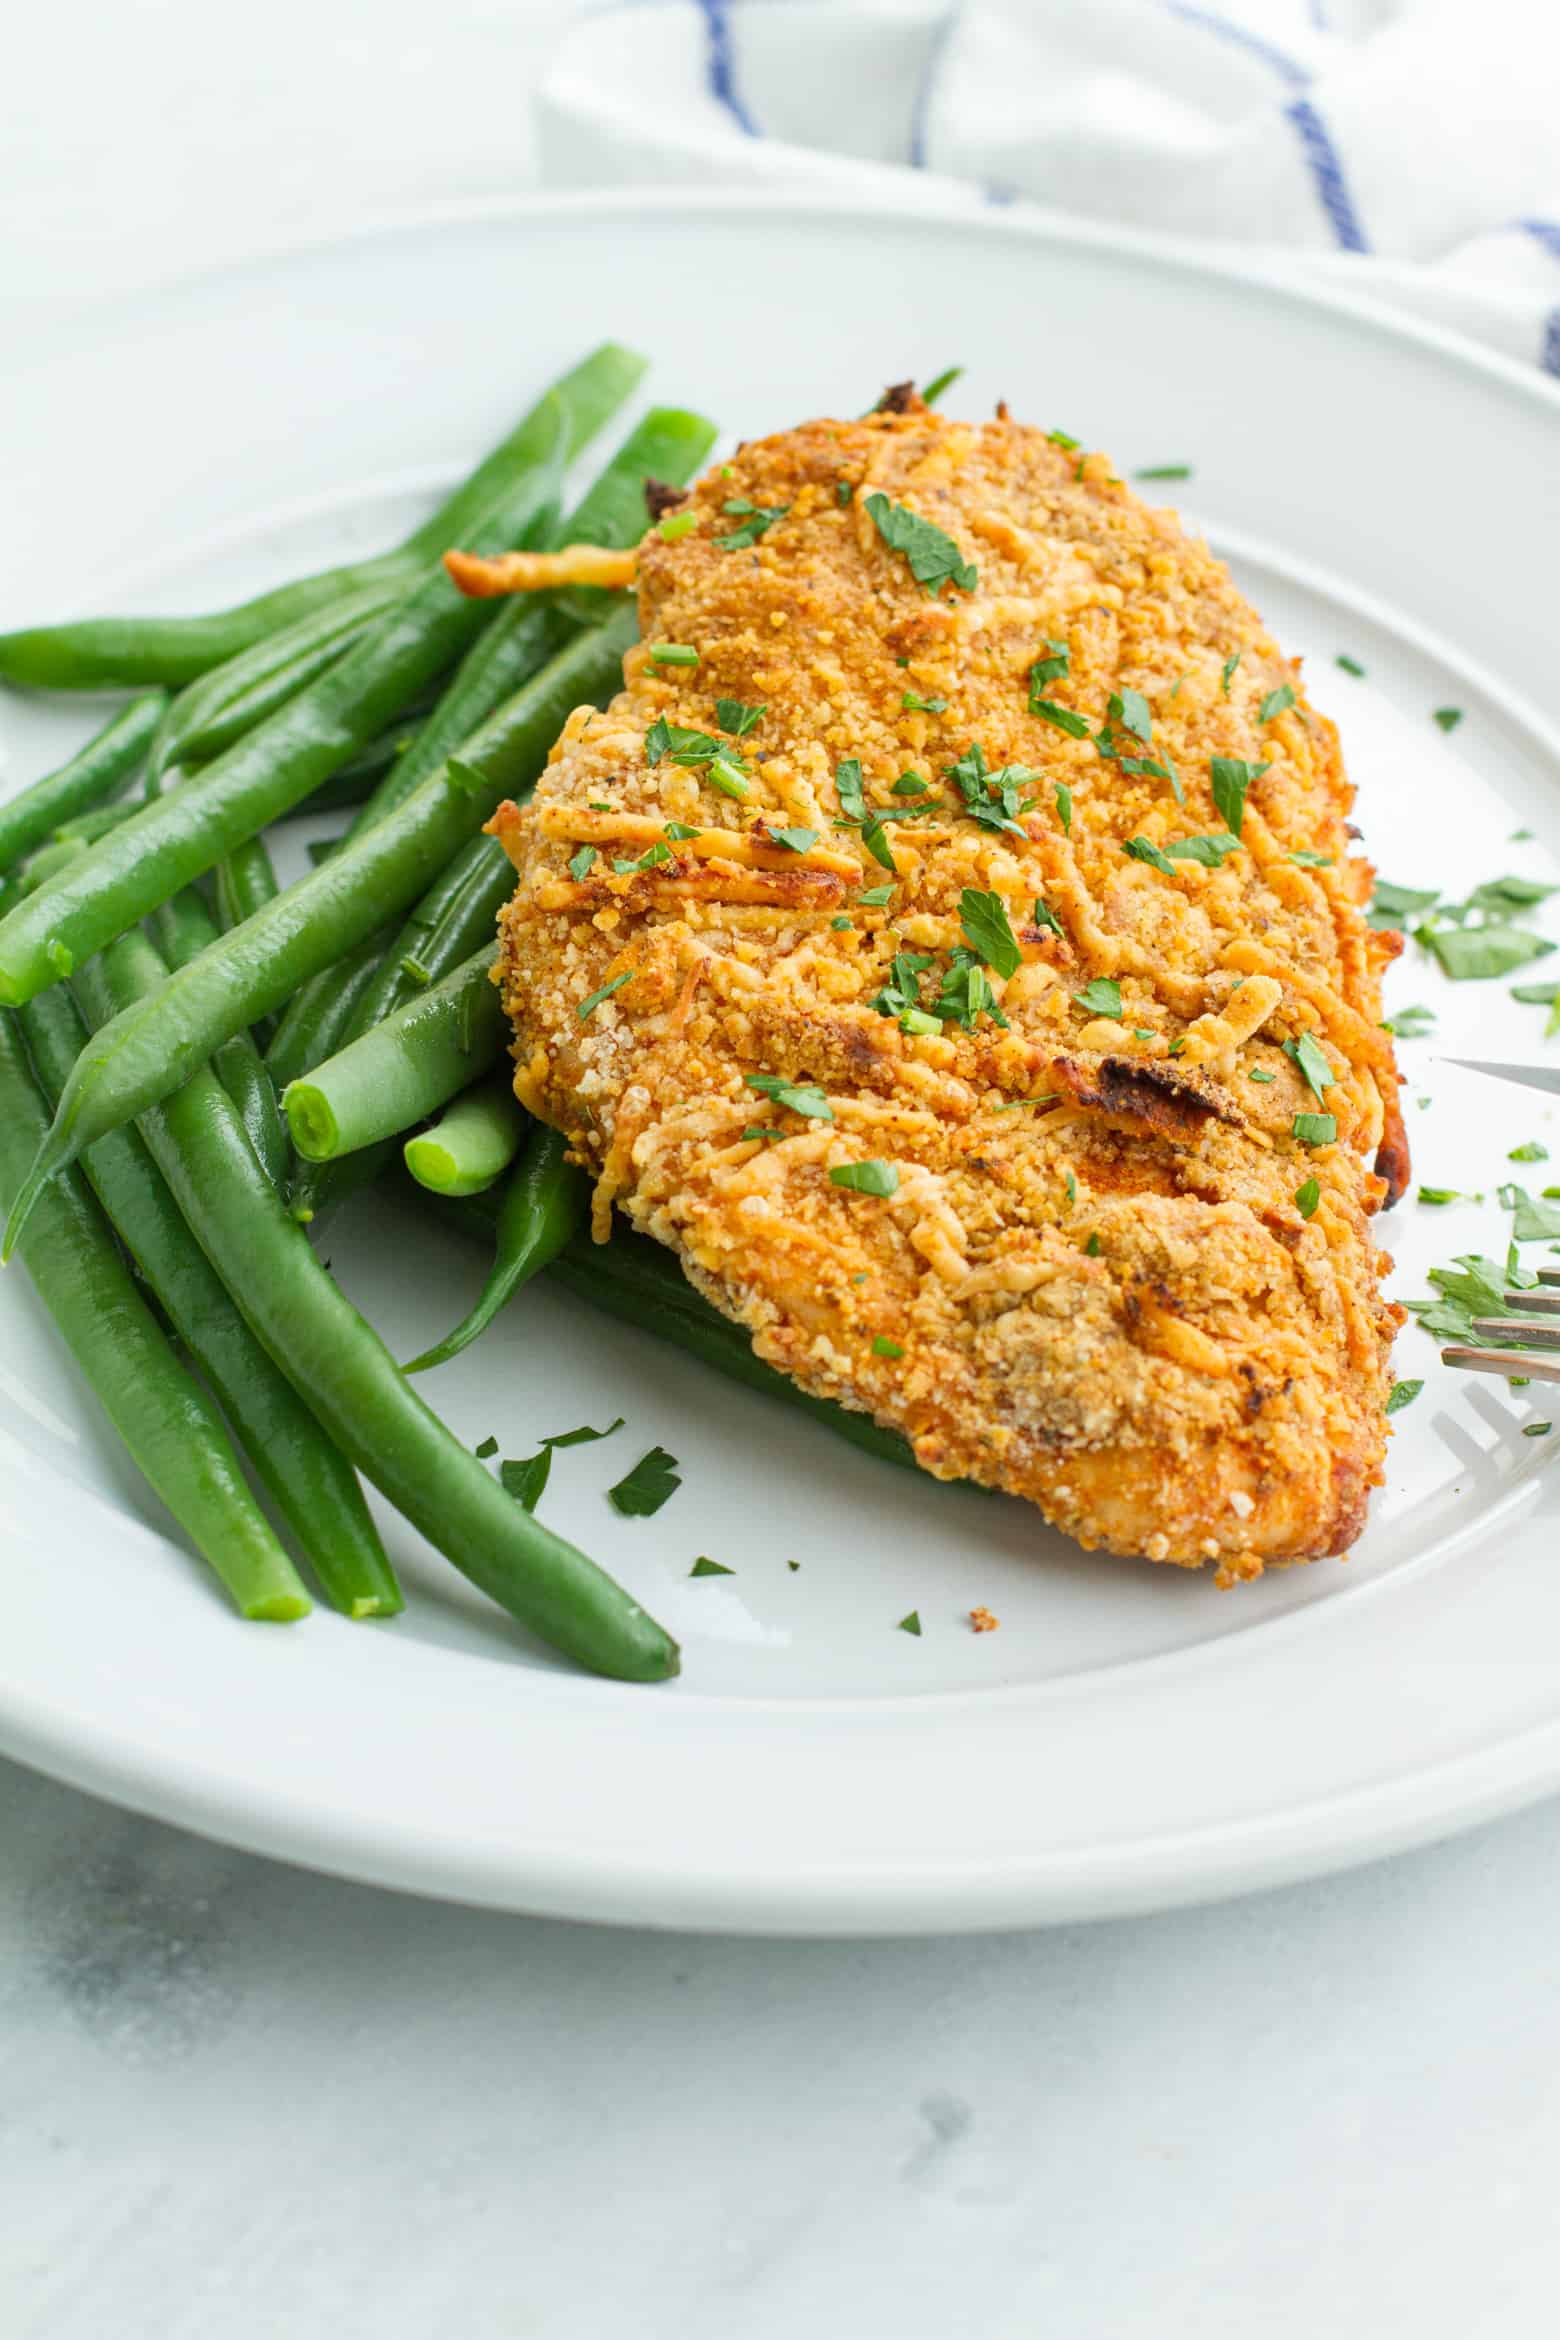 Parmesan Crusted Chicken (Air Fryer) with green beans on a plate.